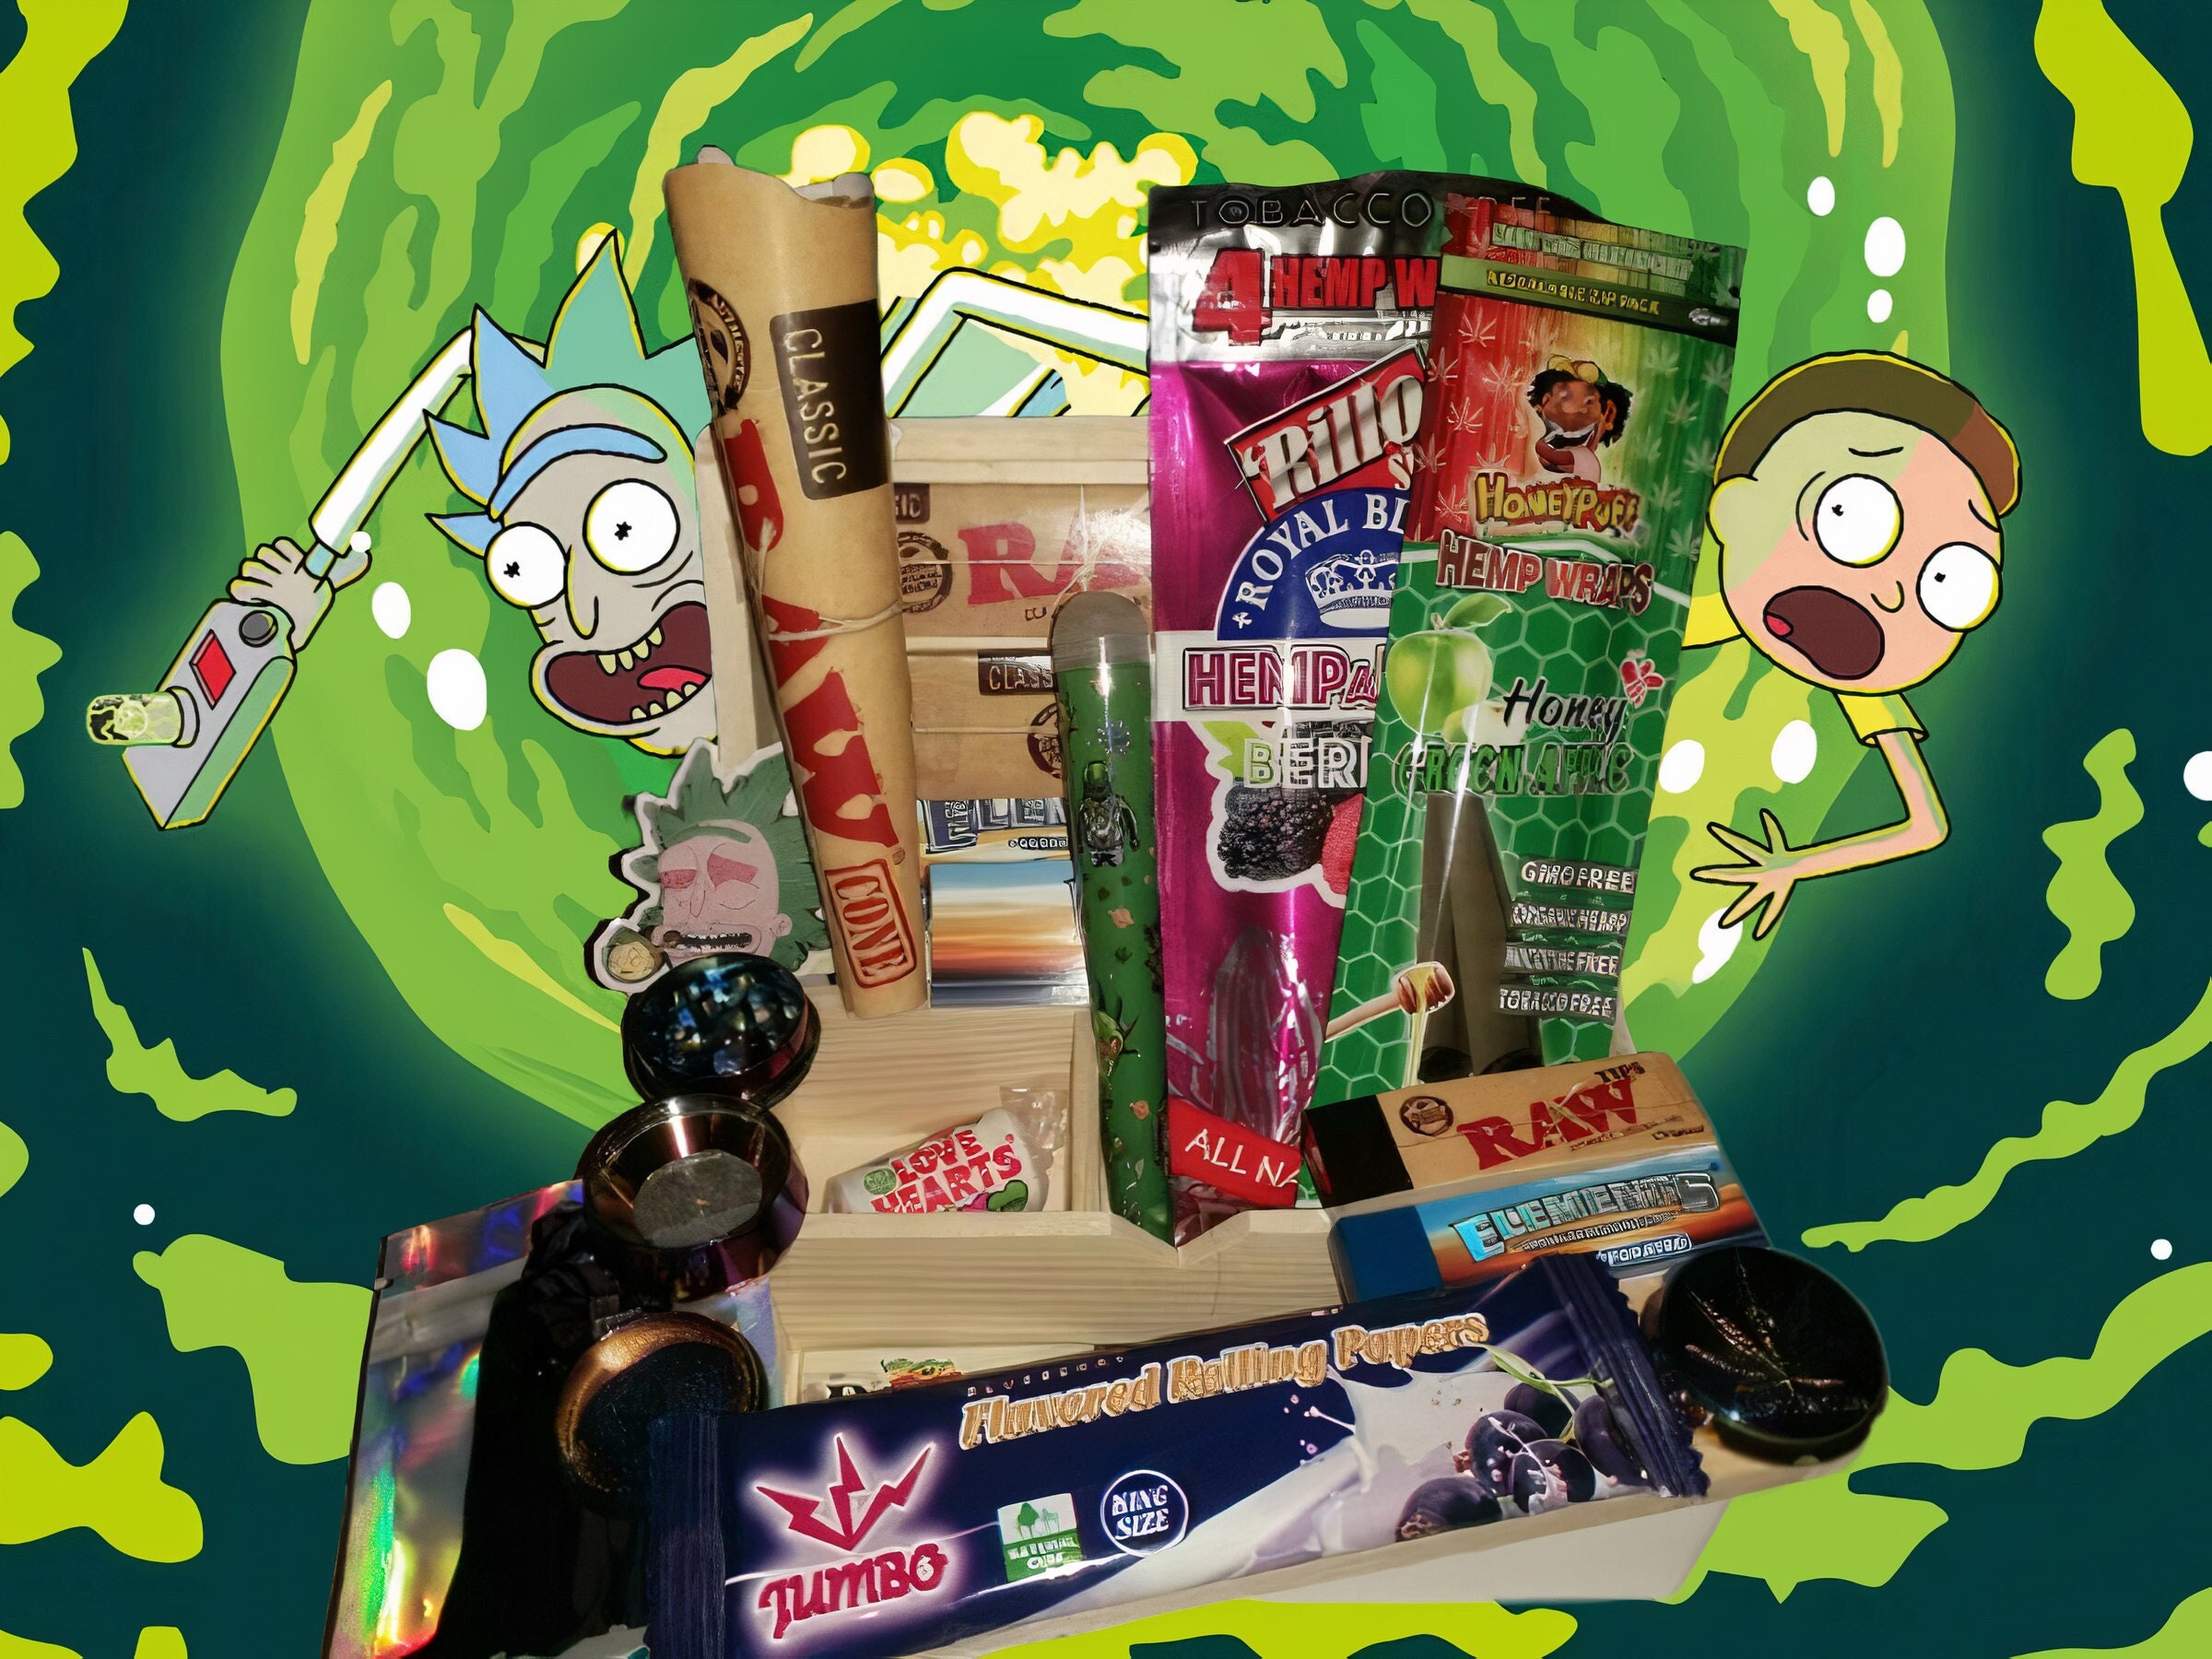 Rick And Morty Stash Box / Rolling Box - Stench Customs